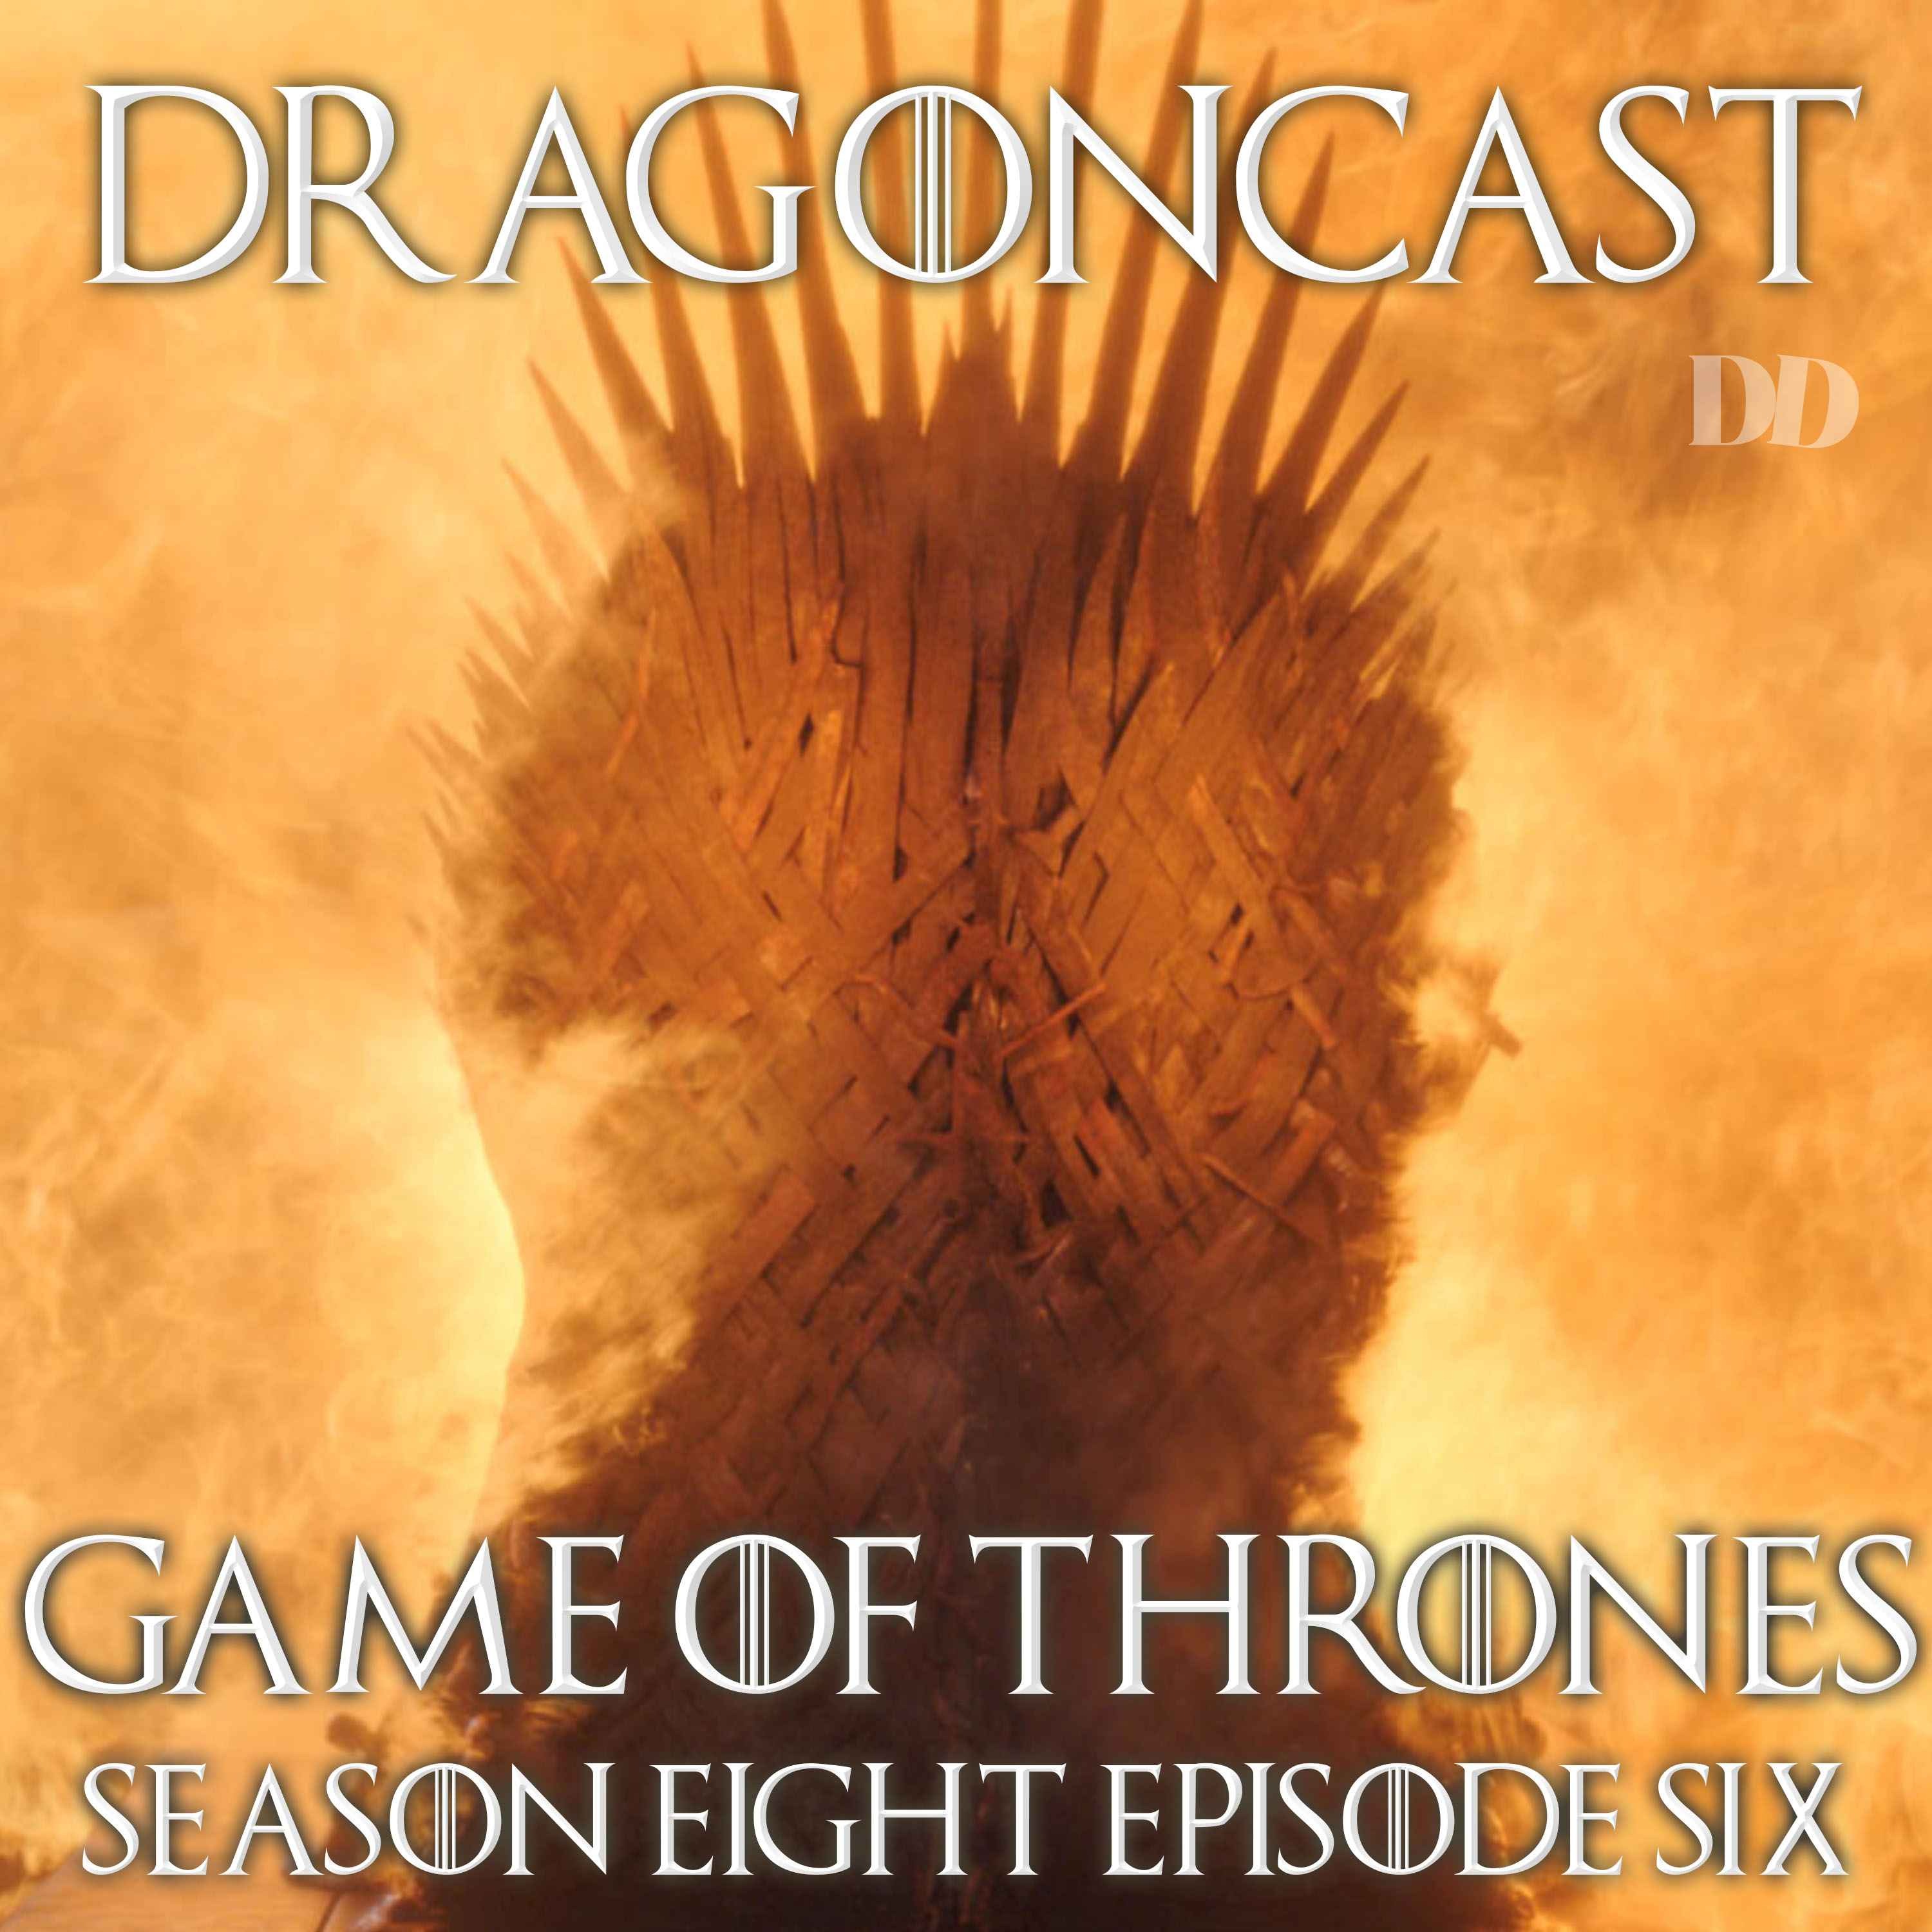 Game of Thrones Rewatch Episode: S8 E6 - The Iron Throne PART 1